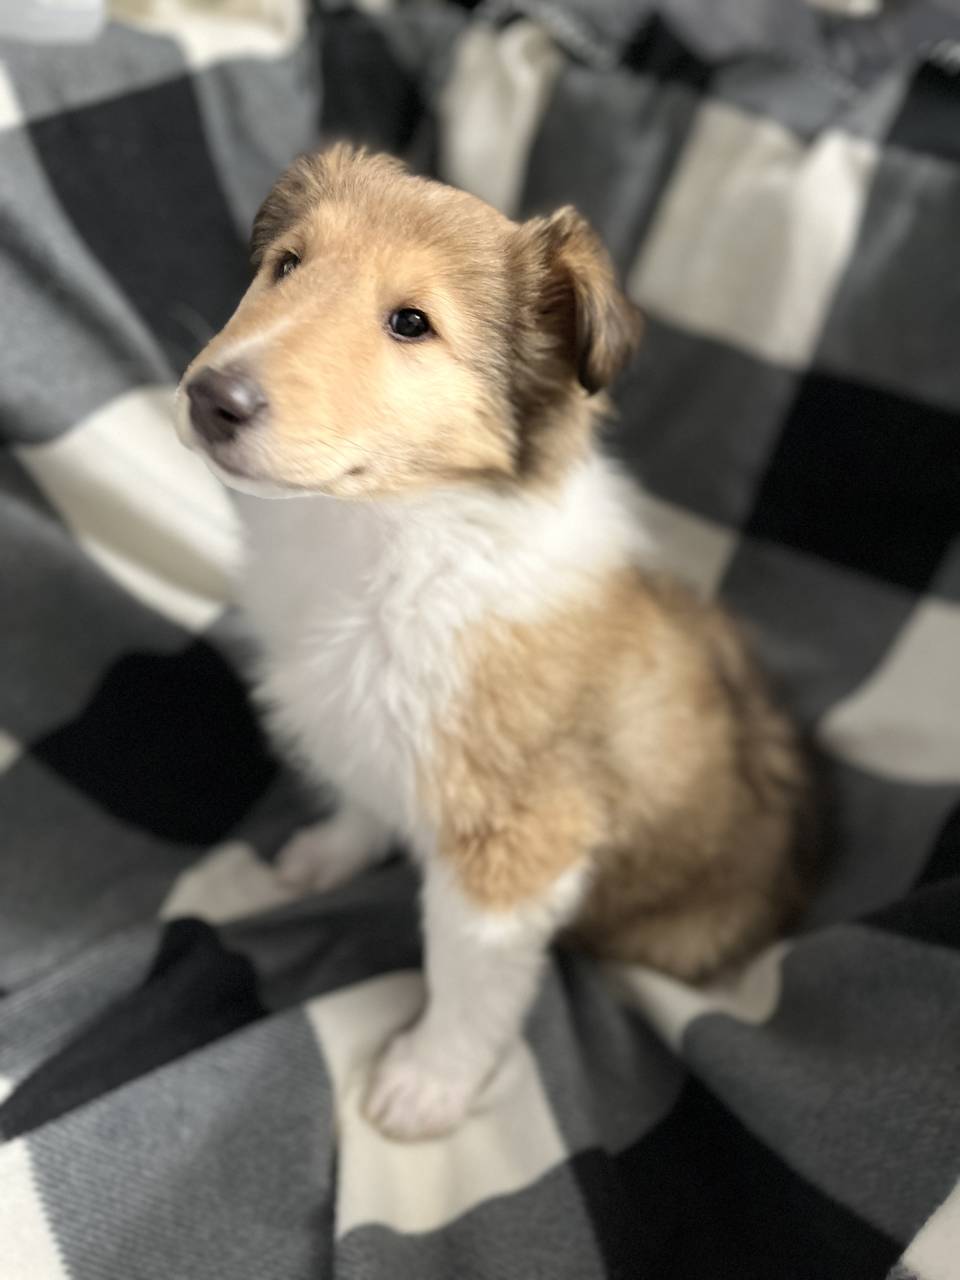 Collie named Sable Male Lassie Collie Pup!